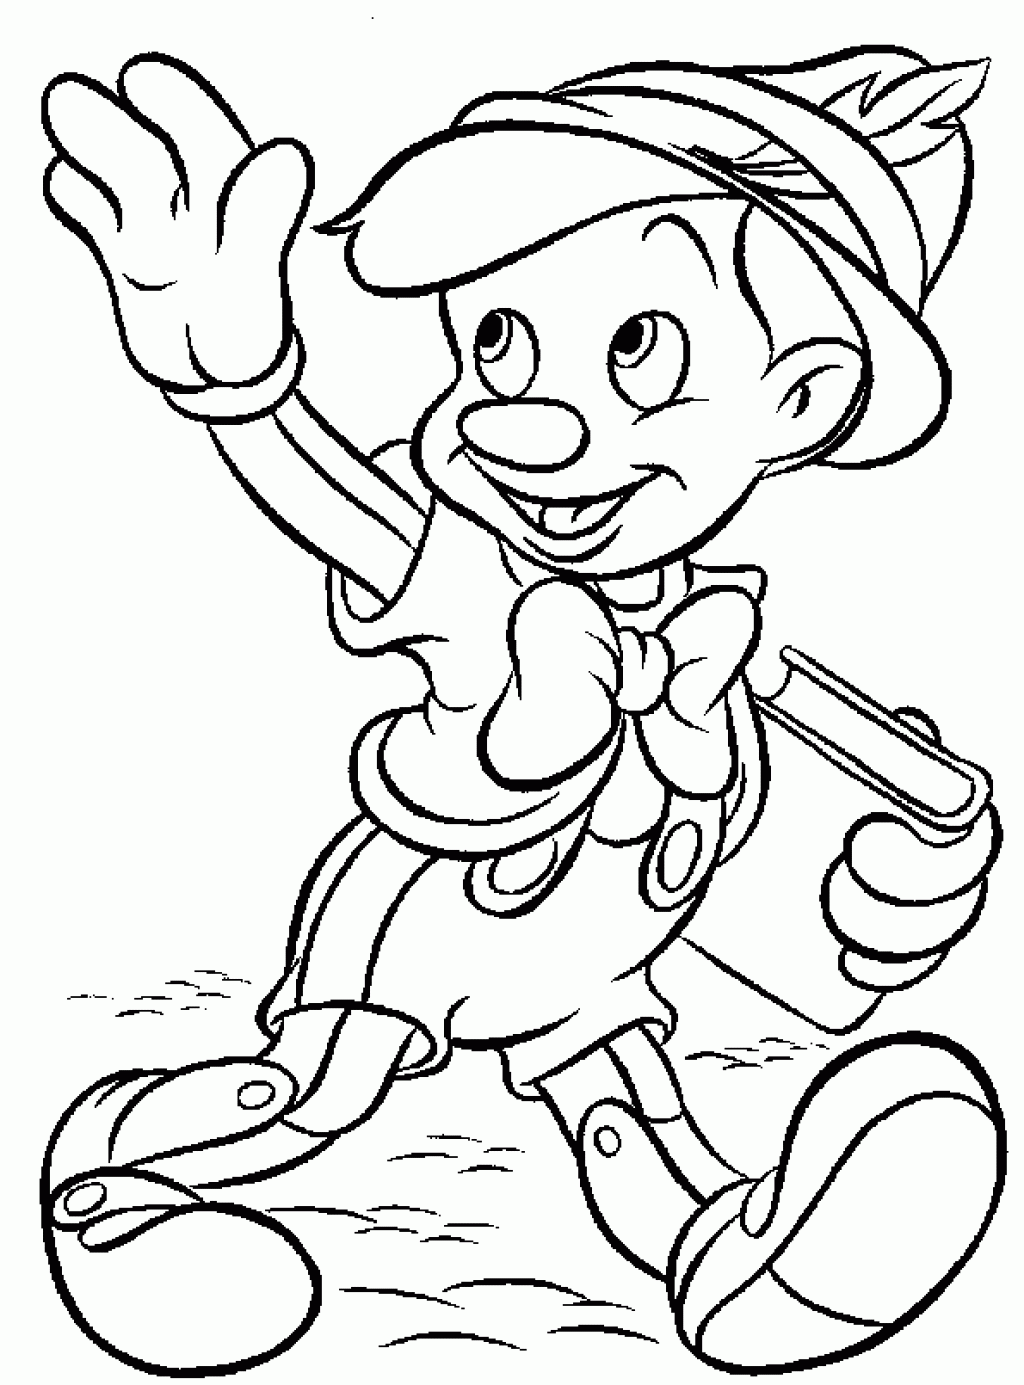 colouring pages for toddlers printable printable dora coloring pages free printable coloring printable for colouring pages toddlers 